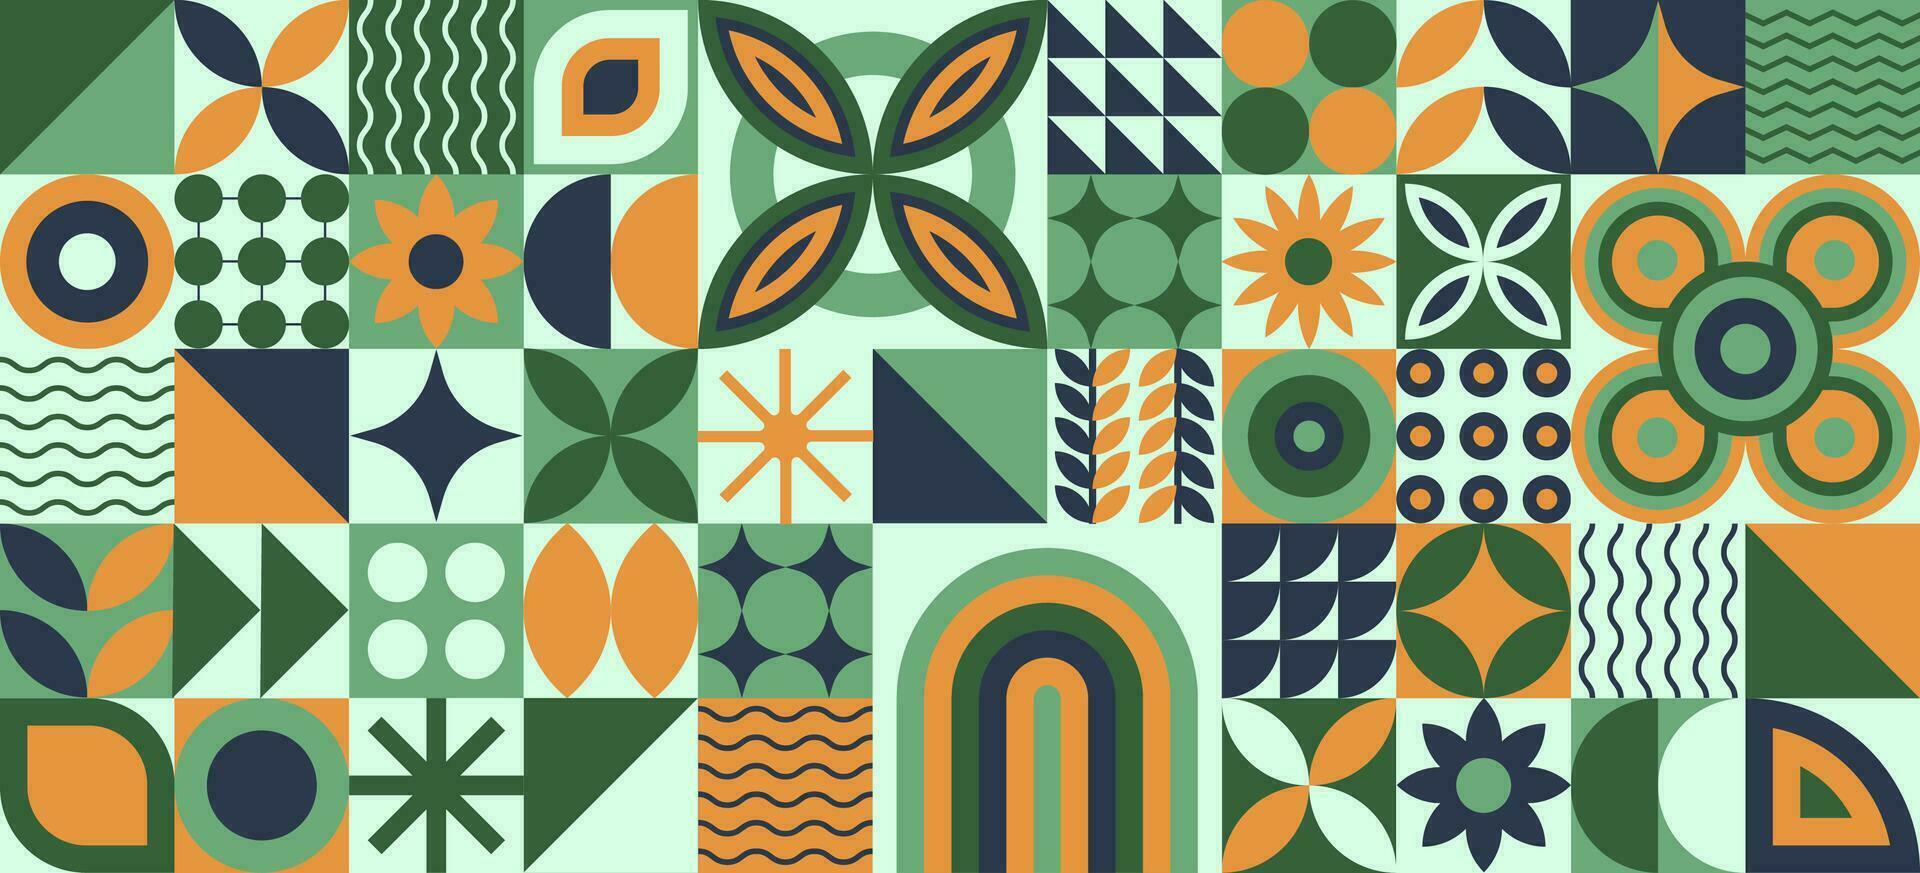 Bauhaus art with plants, natural geometric pattern in tiles, decorative abstract design with flowers and leaves, vector illustration, banner, wallpaper.